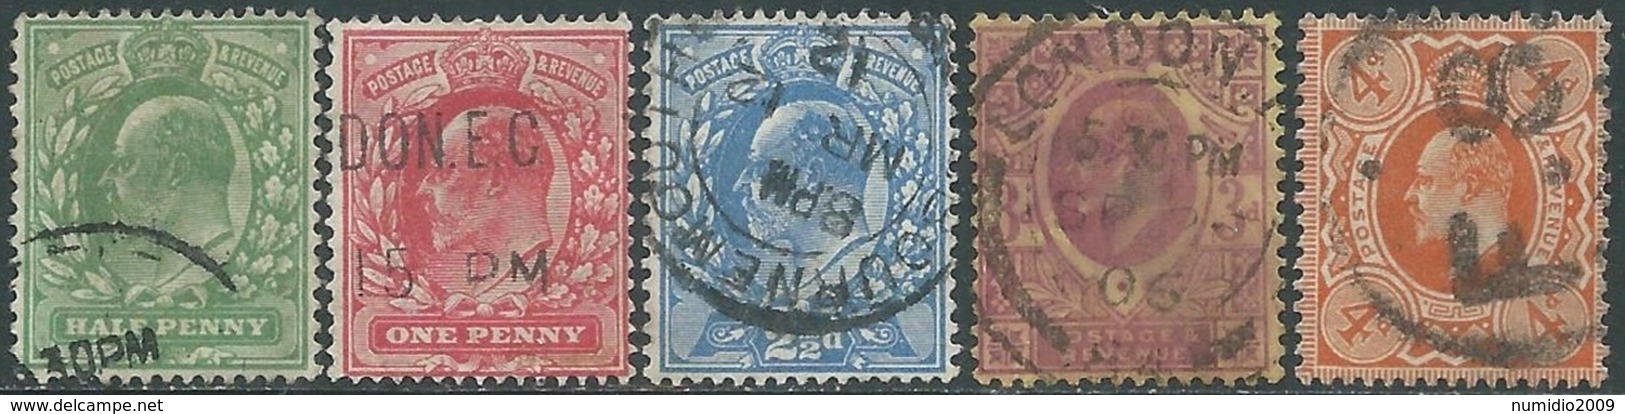 1911 GREAT BRITAIN USED KING EDWARD II 5 STAMPS - RC1-5 - Usati